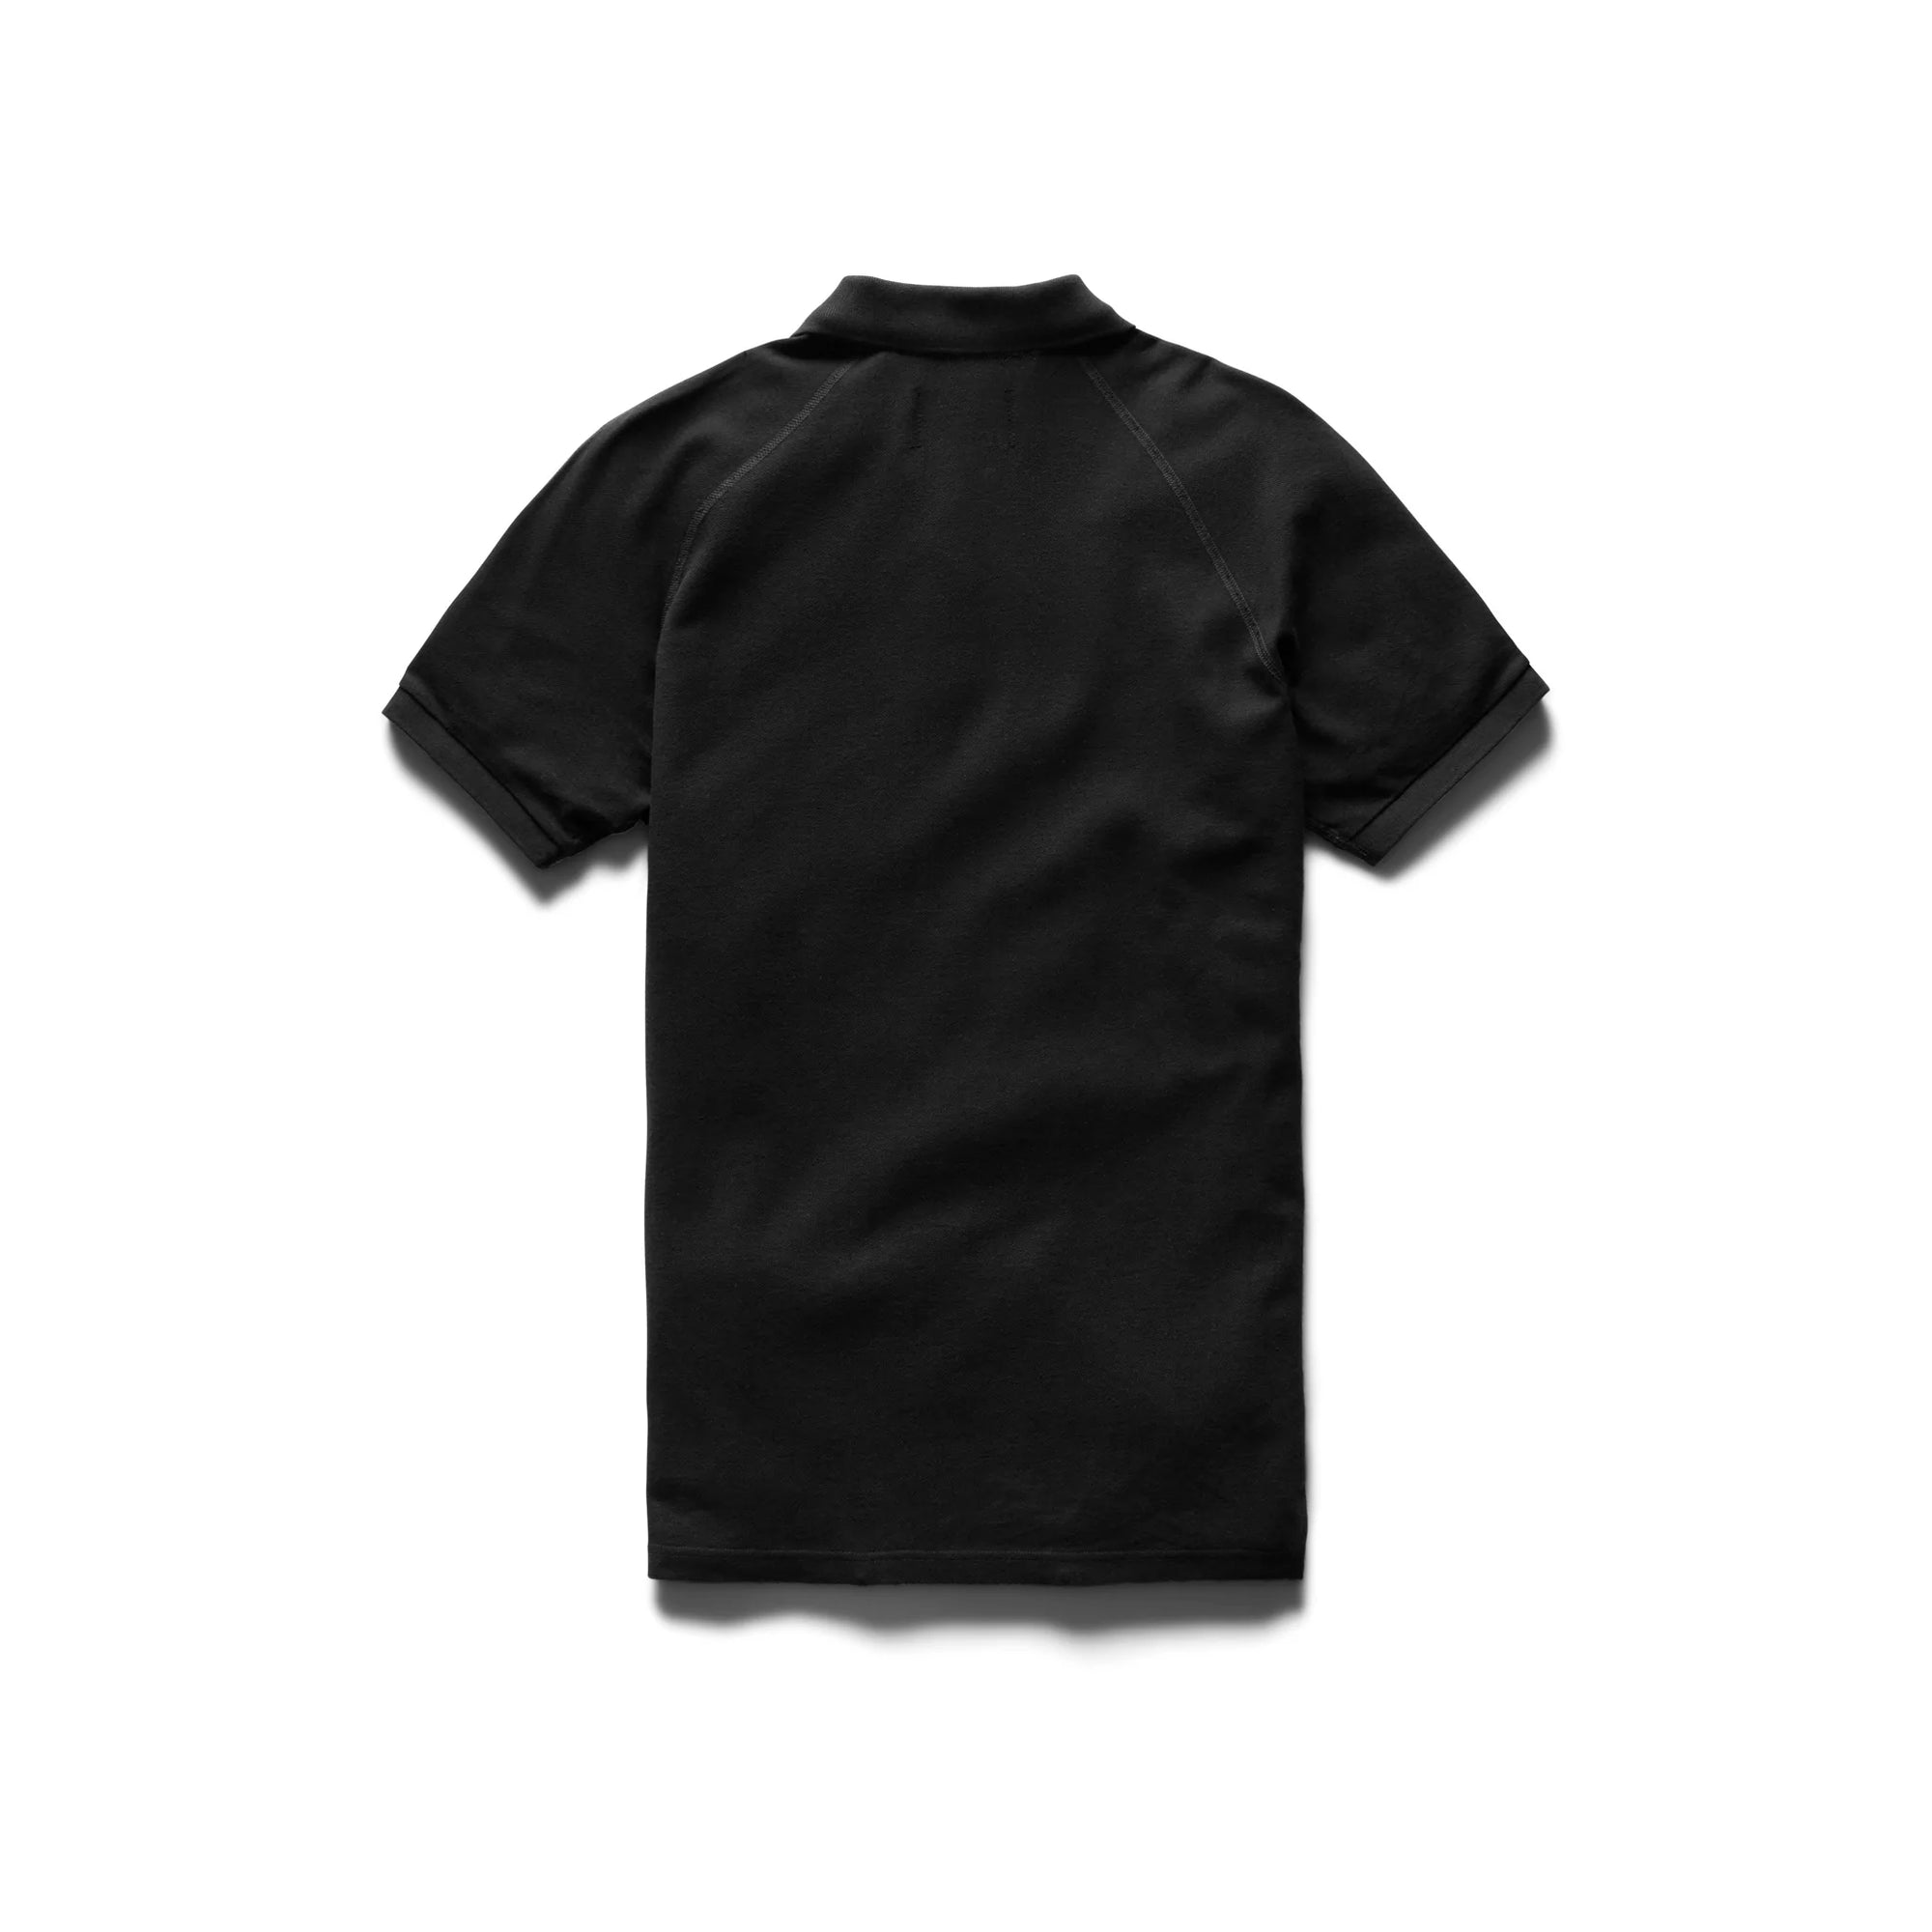 Reigning Champ Athletic Pique Polo in Black